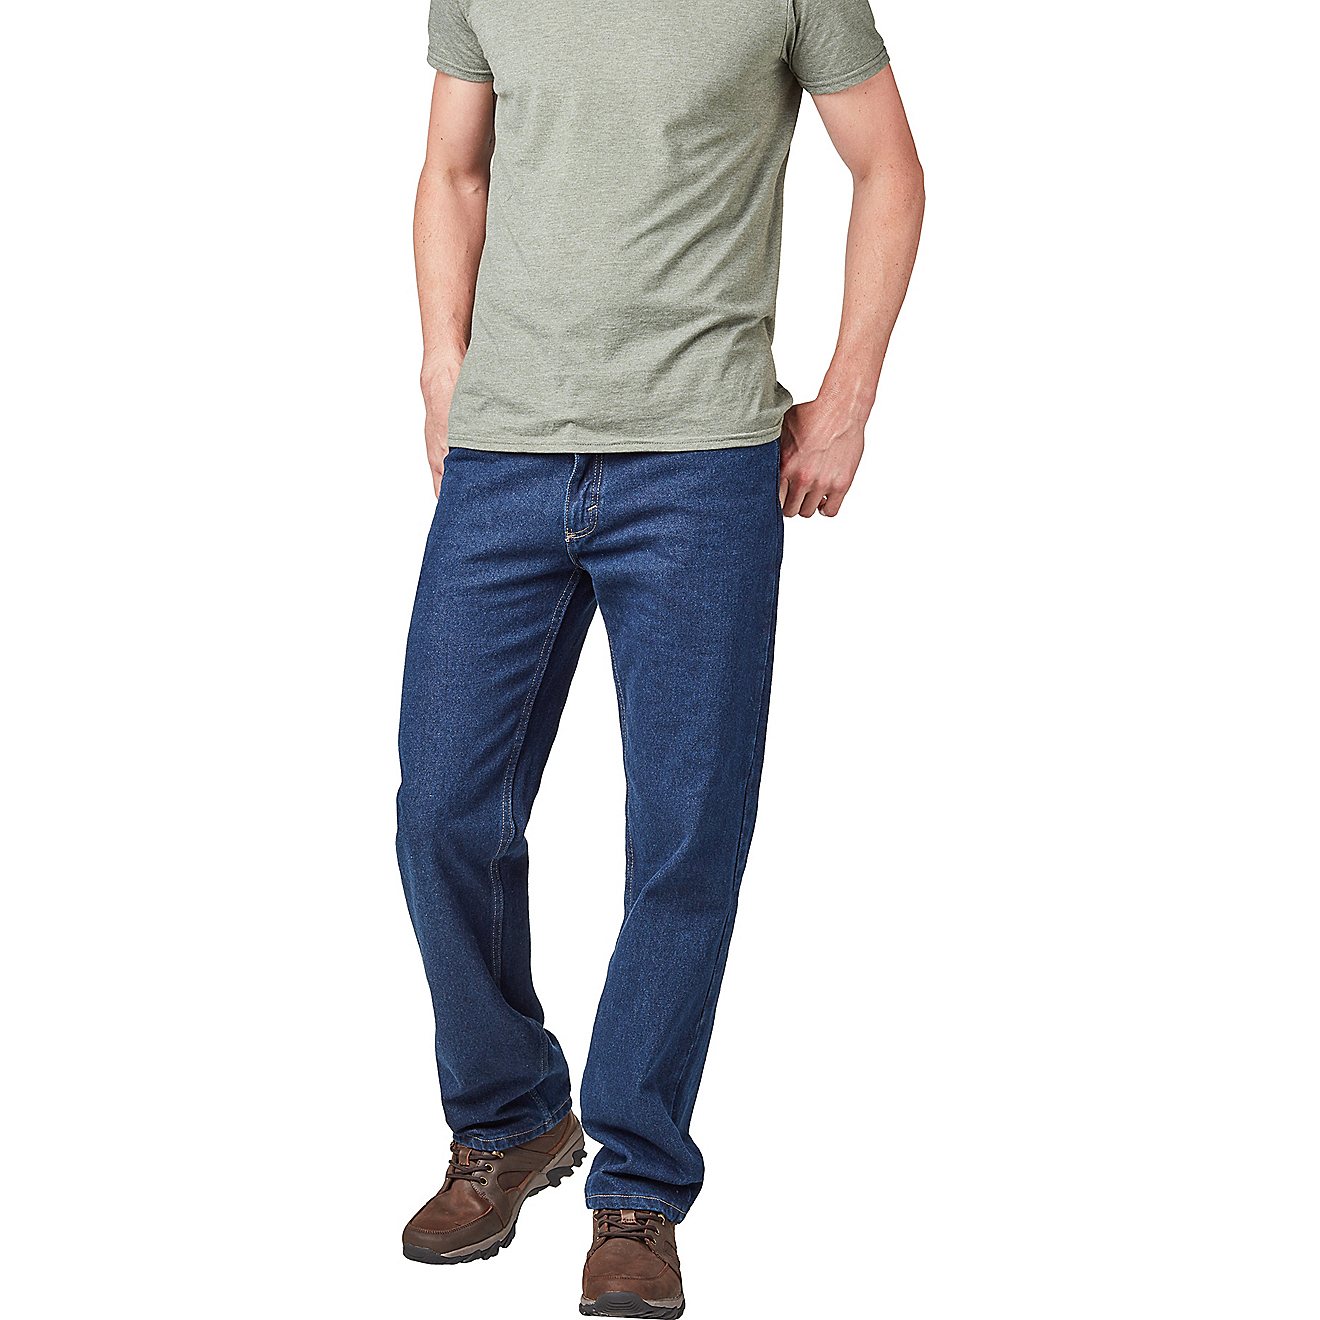 Outdoors Men's Classic Fit Jeans Academy